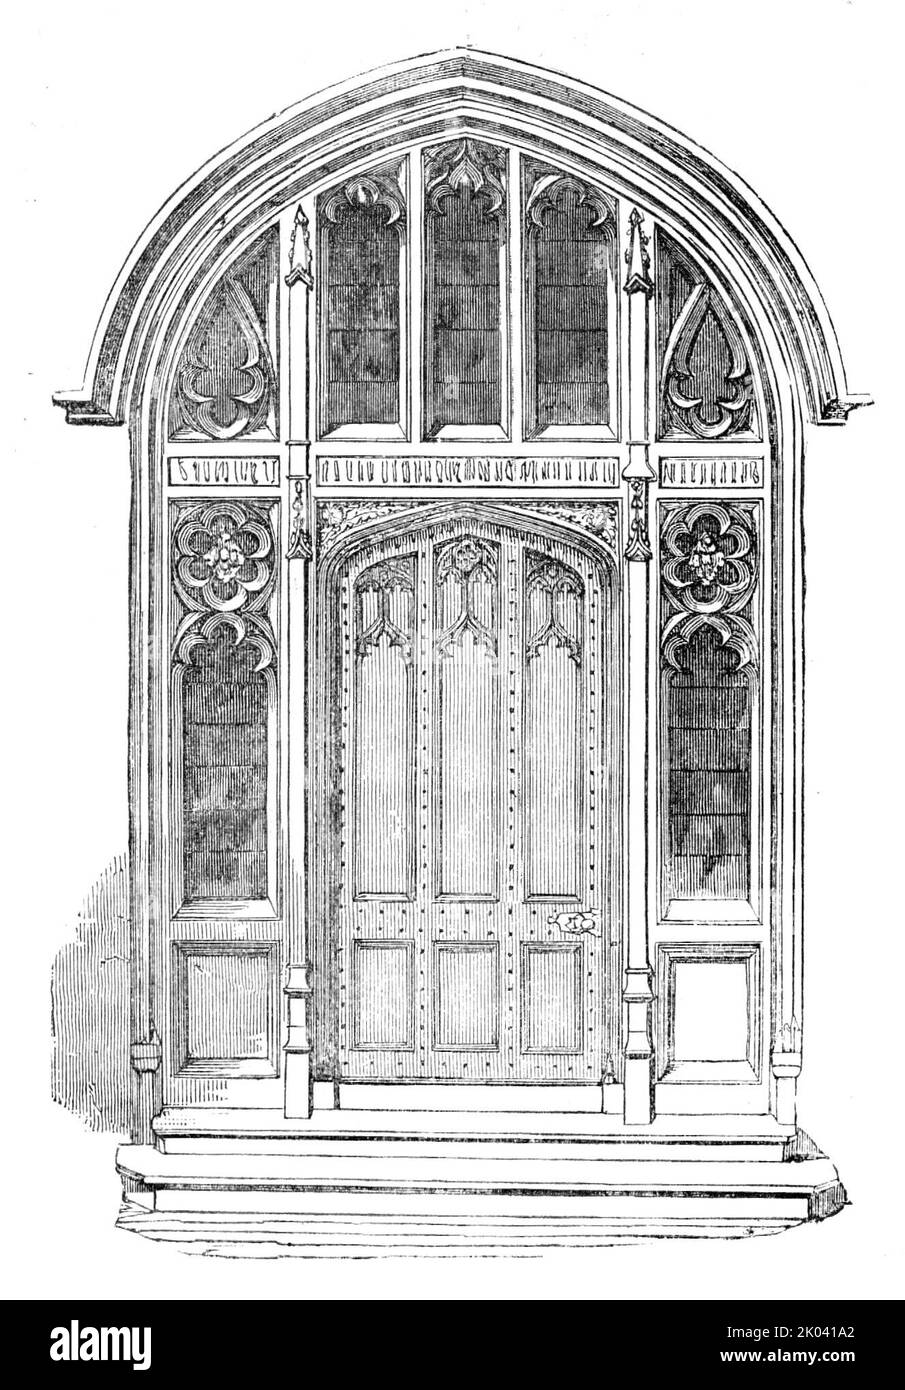 The New Houses of Parliament - Doorway of the Serjeant-at-Arms' Residence, 1854. Interior of the Palace of Westminster, London, designed in Victorian Gothic style by Augustus Pugin. 'This doorway is seen on the north side of the Speaker's Court, and forms a pleasing object, whether seen directly on entering the Court, or viewed from the farther courts, through whose arched openings it is shown as a rich finish to the vista. The Residence, to which this is the Entrance, will shortly he completed. The fittings-up, both in the master's and servants' hall, are being studied with scrupulous care, s Stock Photo